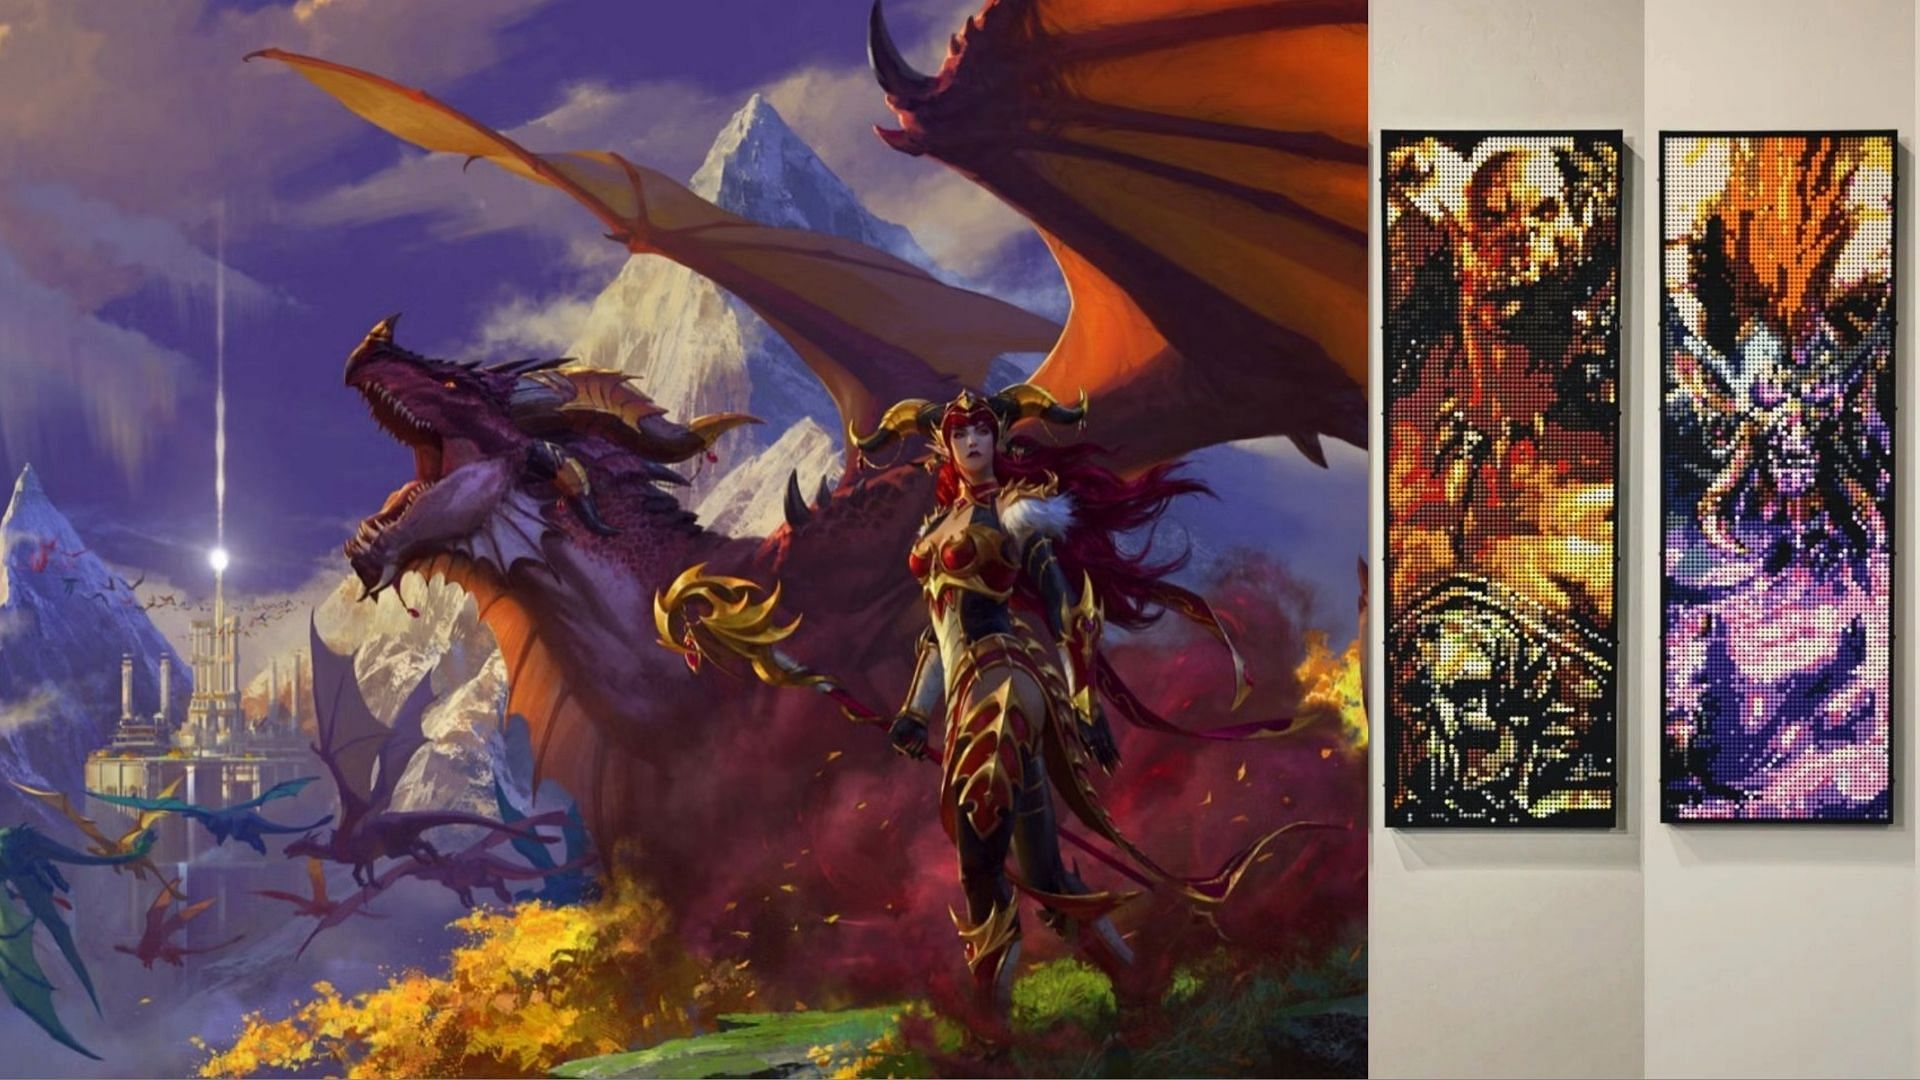 A dragon and a World of Warcraft character on the left and LEGO mosaics on the right.